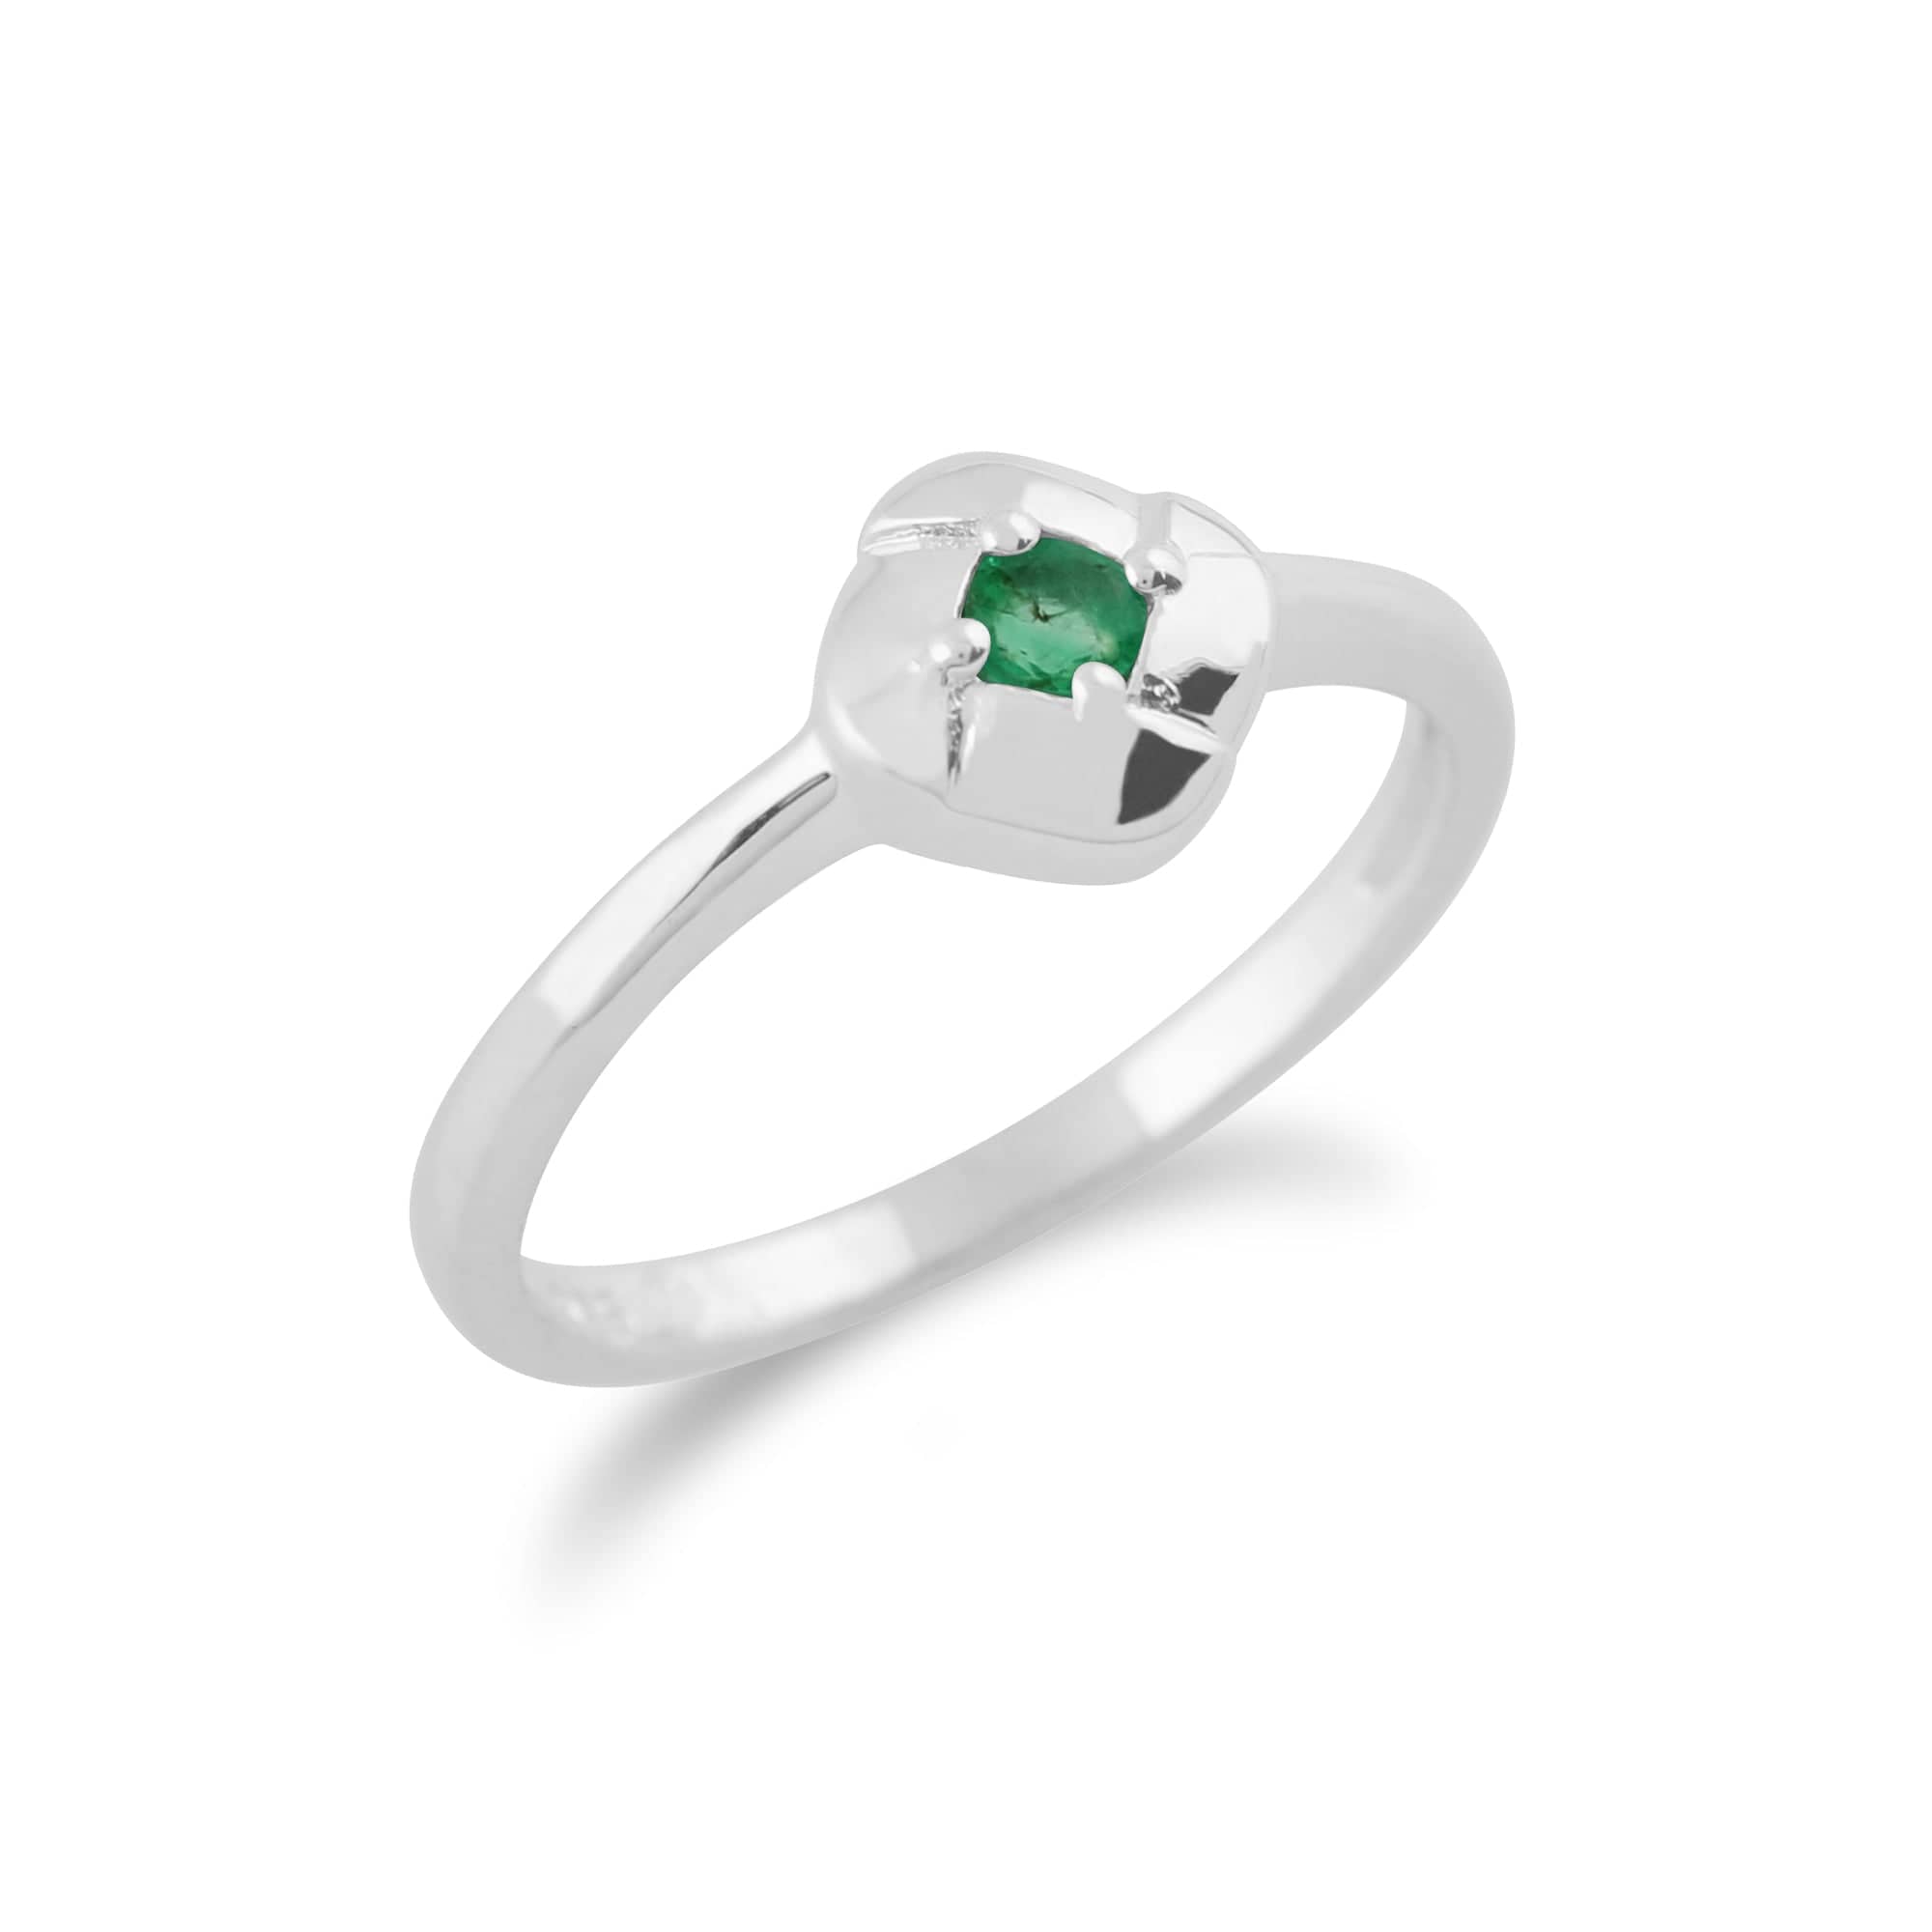 Gemondo 925 Sterling Silver 0.11ct Emerald Square Crossover Ring Image 2